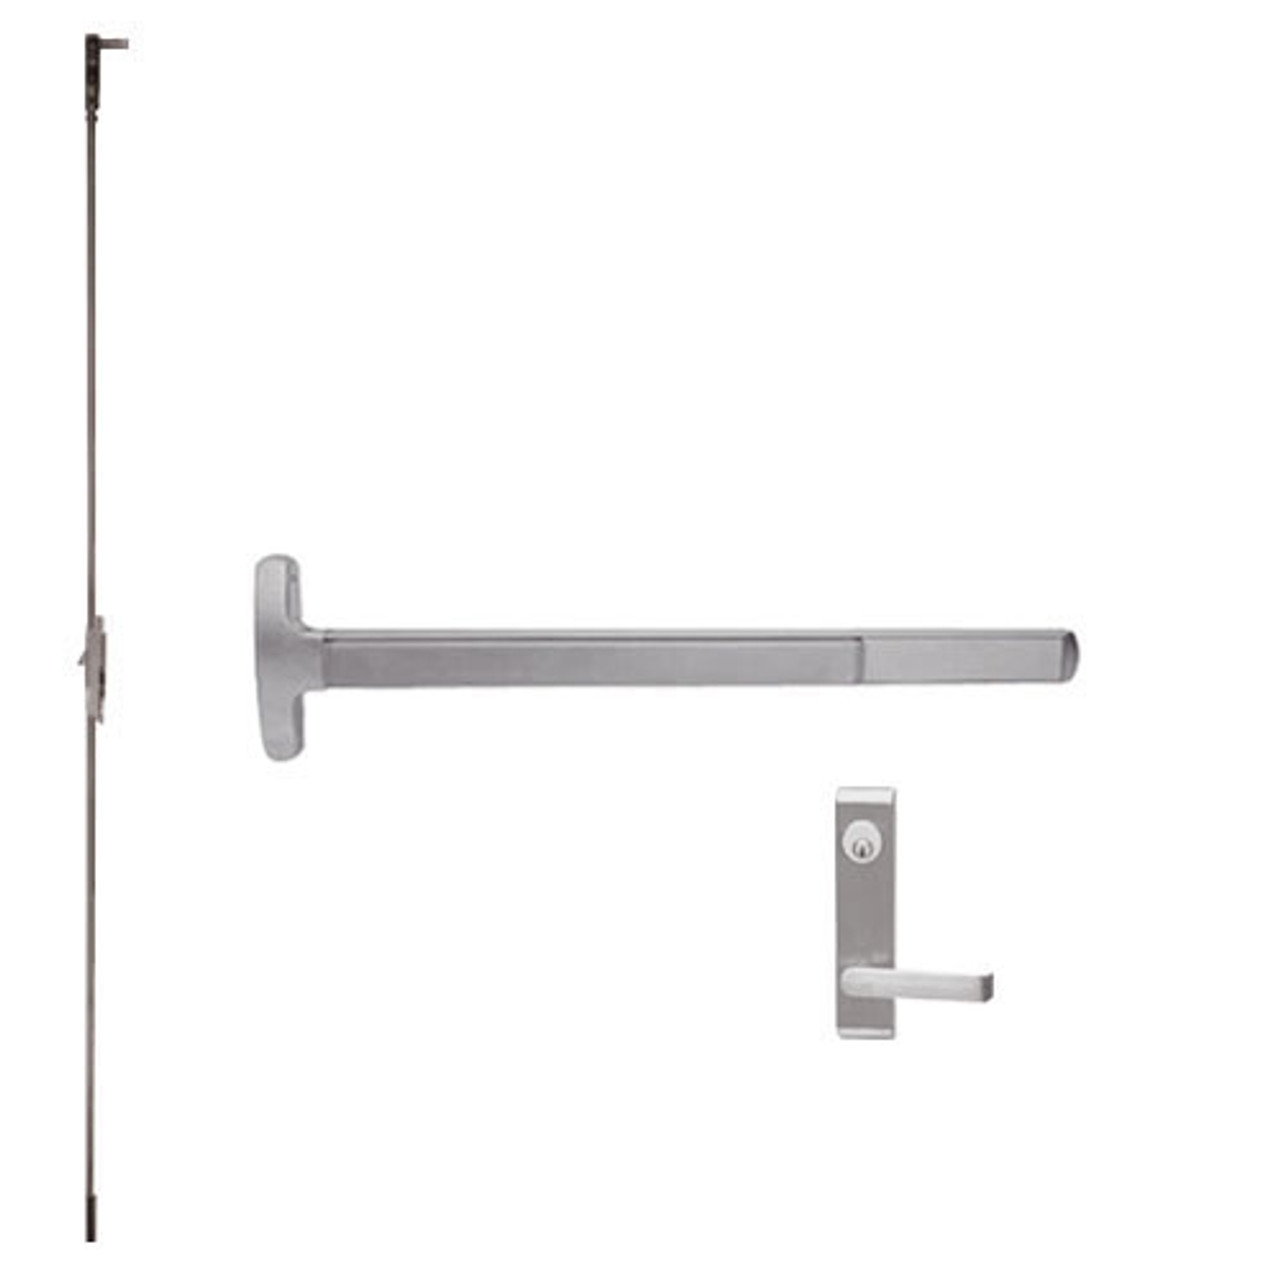 F-24-C-L-DANE-US32D-4-RHR Falcon Exit Device in Satin Stainless Steel